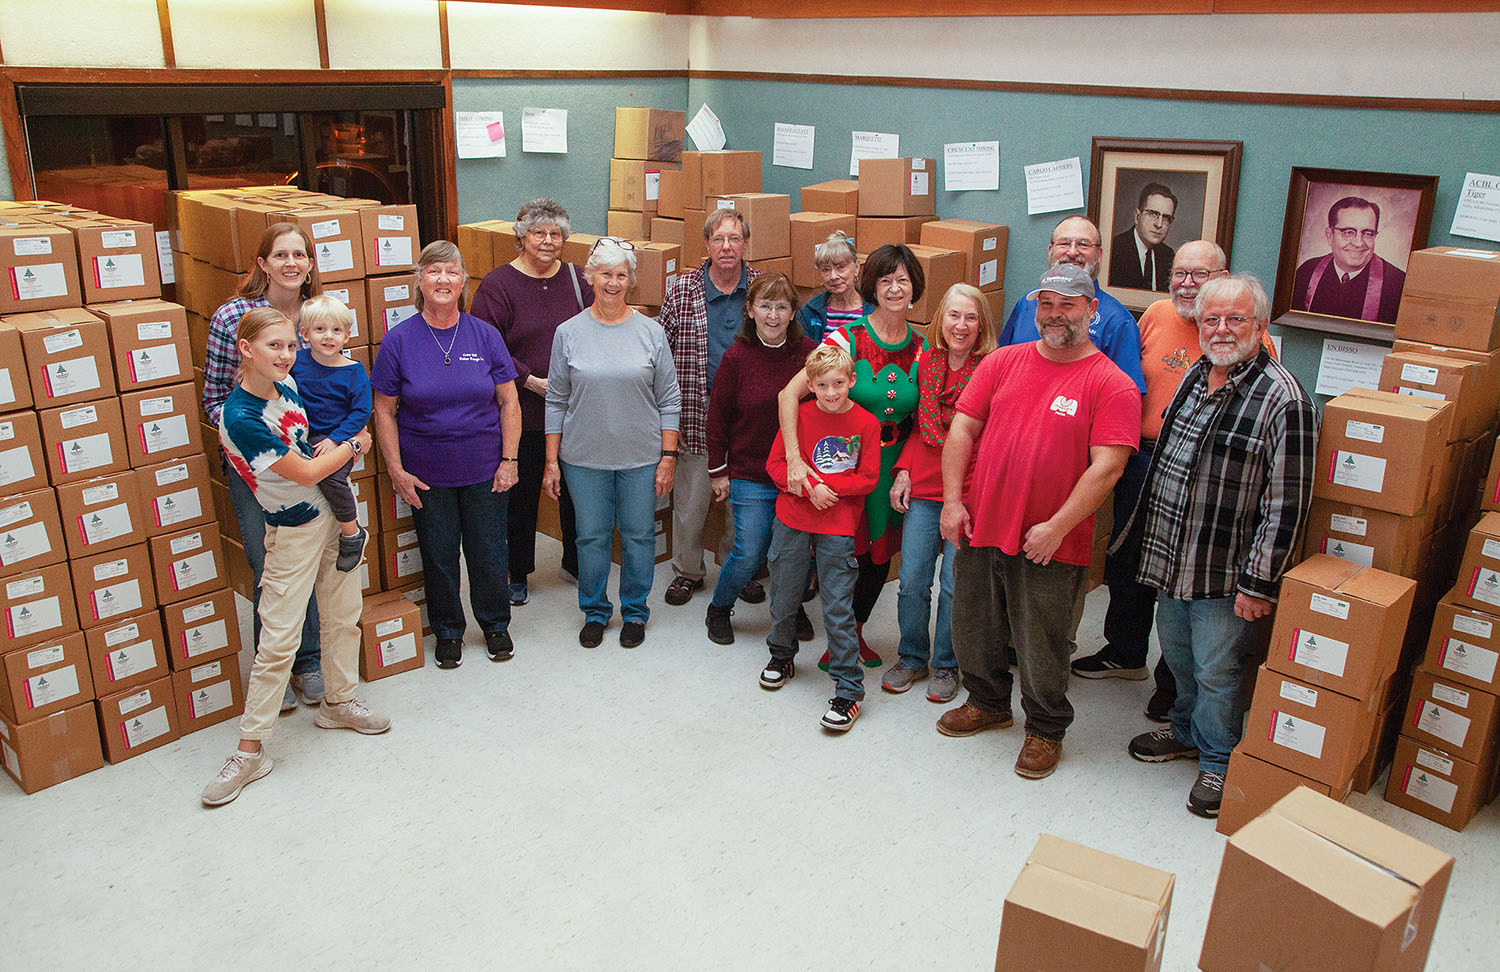 Volunteers at a Seamen’s Church Institute Christmas at Sea packing event in Baton Rouge, La. (Photo by Frank McCormack)